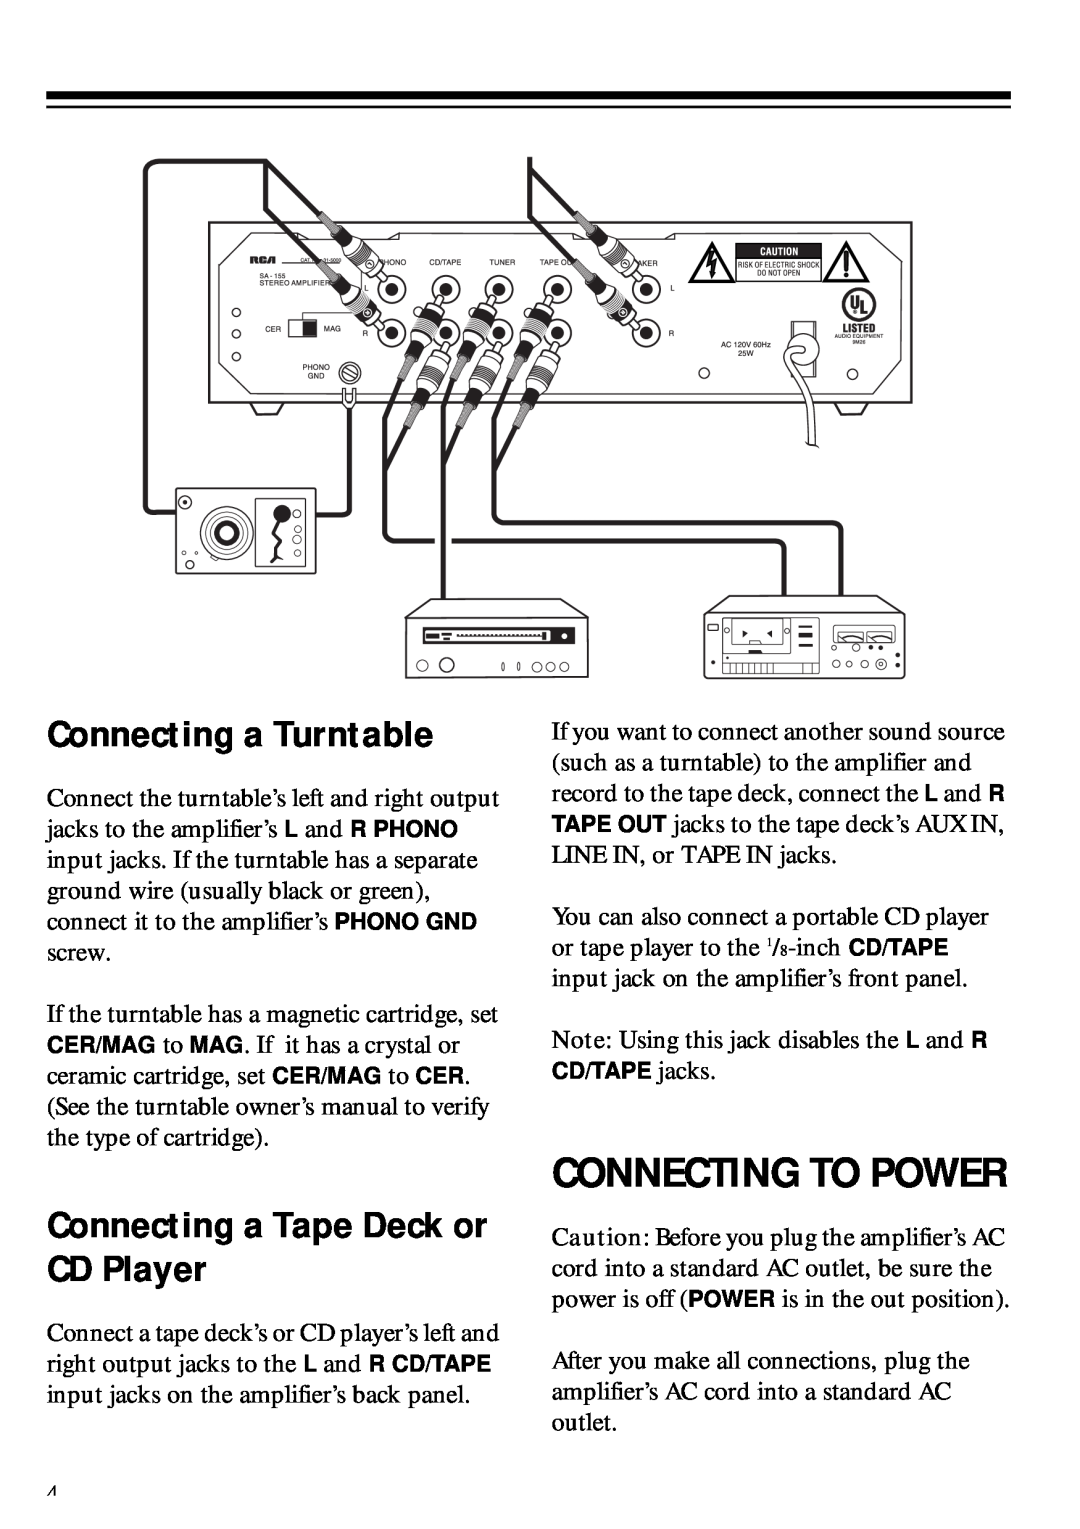 RCA 811082210B, 31-5000, SA-155, 01A02 Connecting To Power, Connecting a Turntable, Connecting a Tape Deck or CD Player 